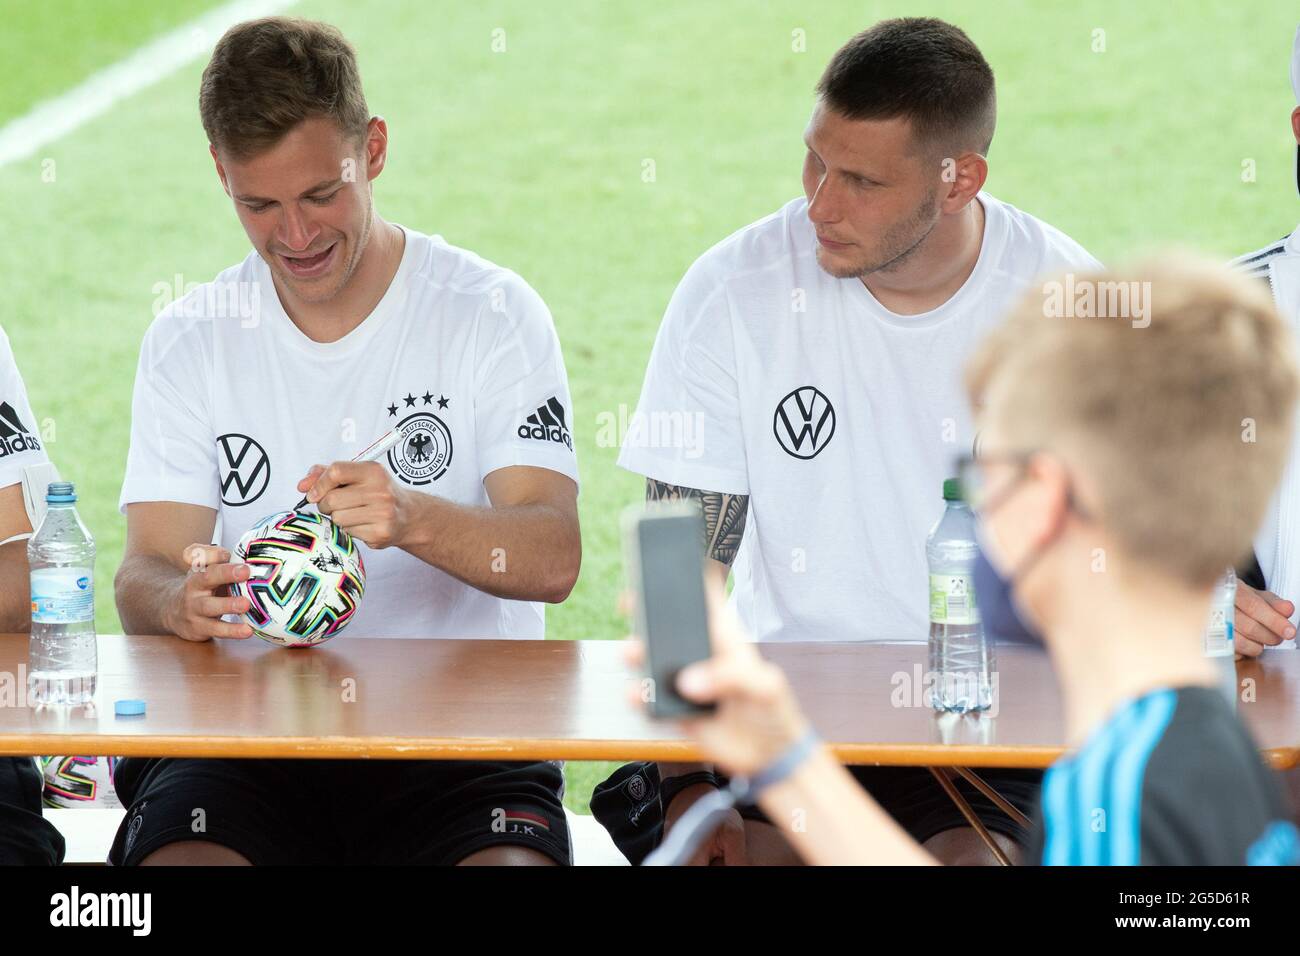 Herzogenaurach, Germany. 26th June, 2021. Football: European Championship, autograph session of the German national team at the Adi Dassler sports ground. Germany's Joshua Kimmich (l) and Niklas Süle sign balls during an autograph session. Credit: Federico Gambarini/dpa/Alamy Live News Stock Photo